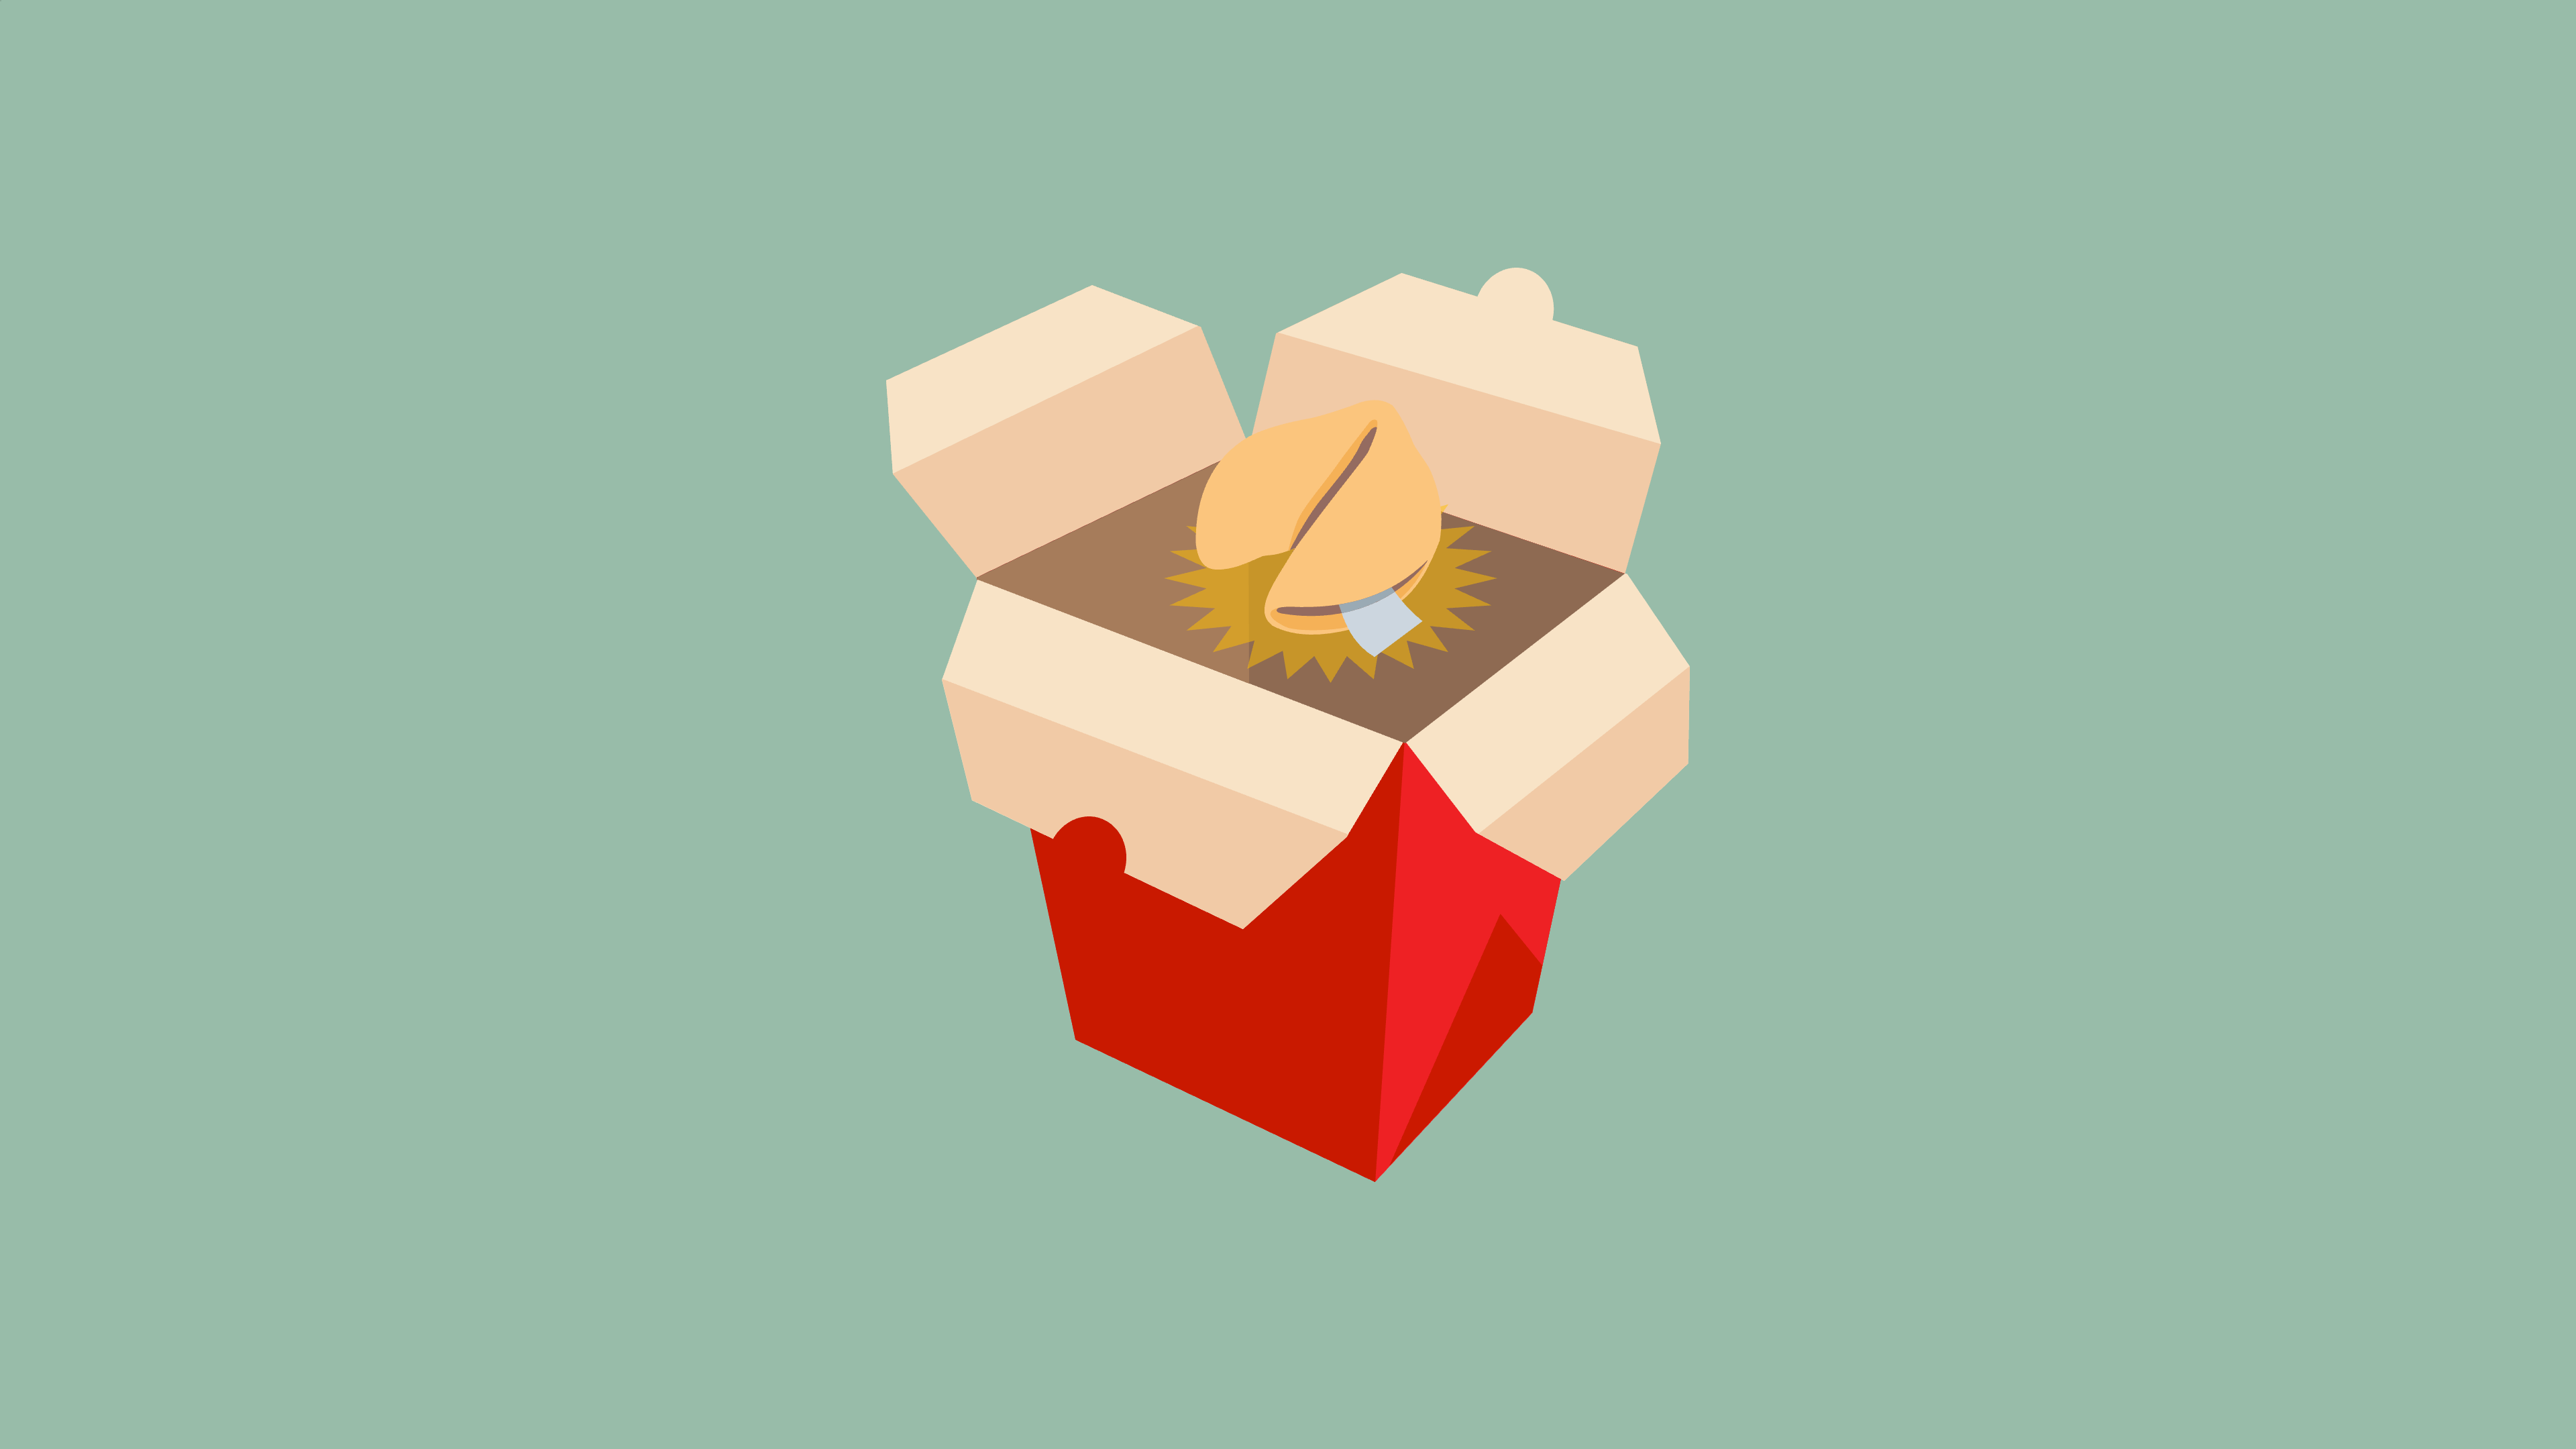 A fortune cookie magically floats above a Chinese takeout container